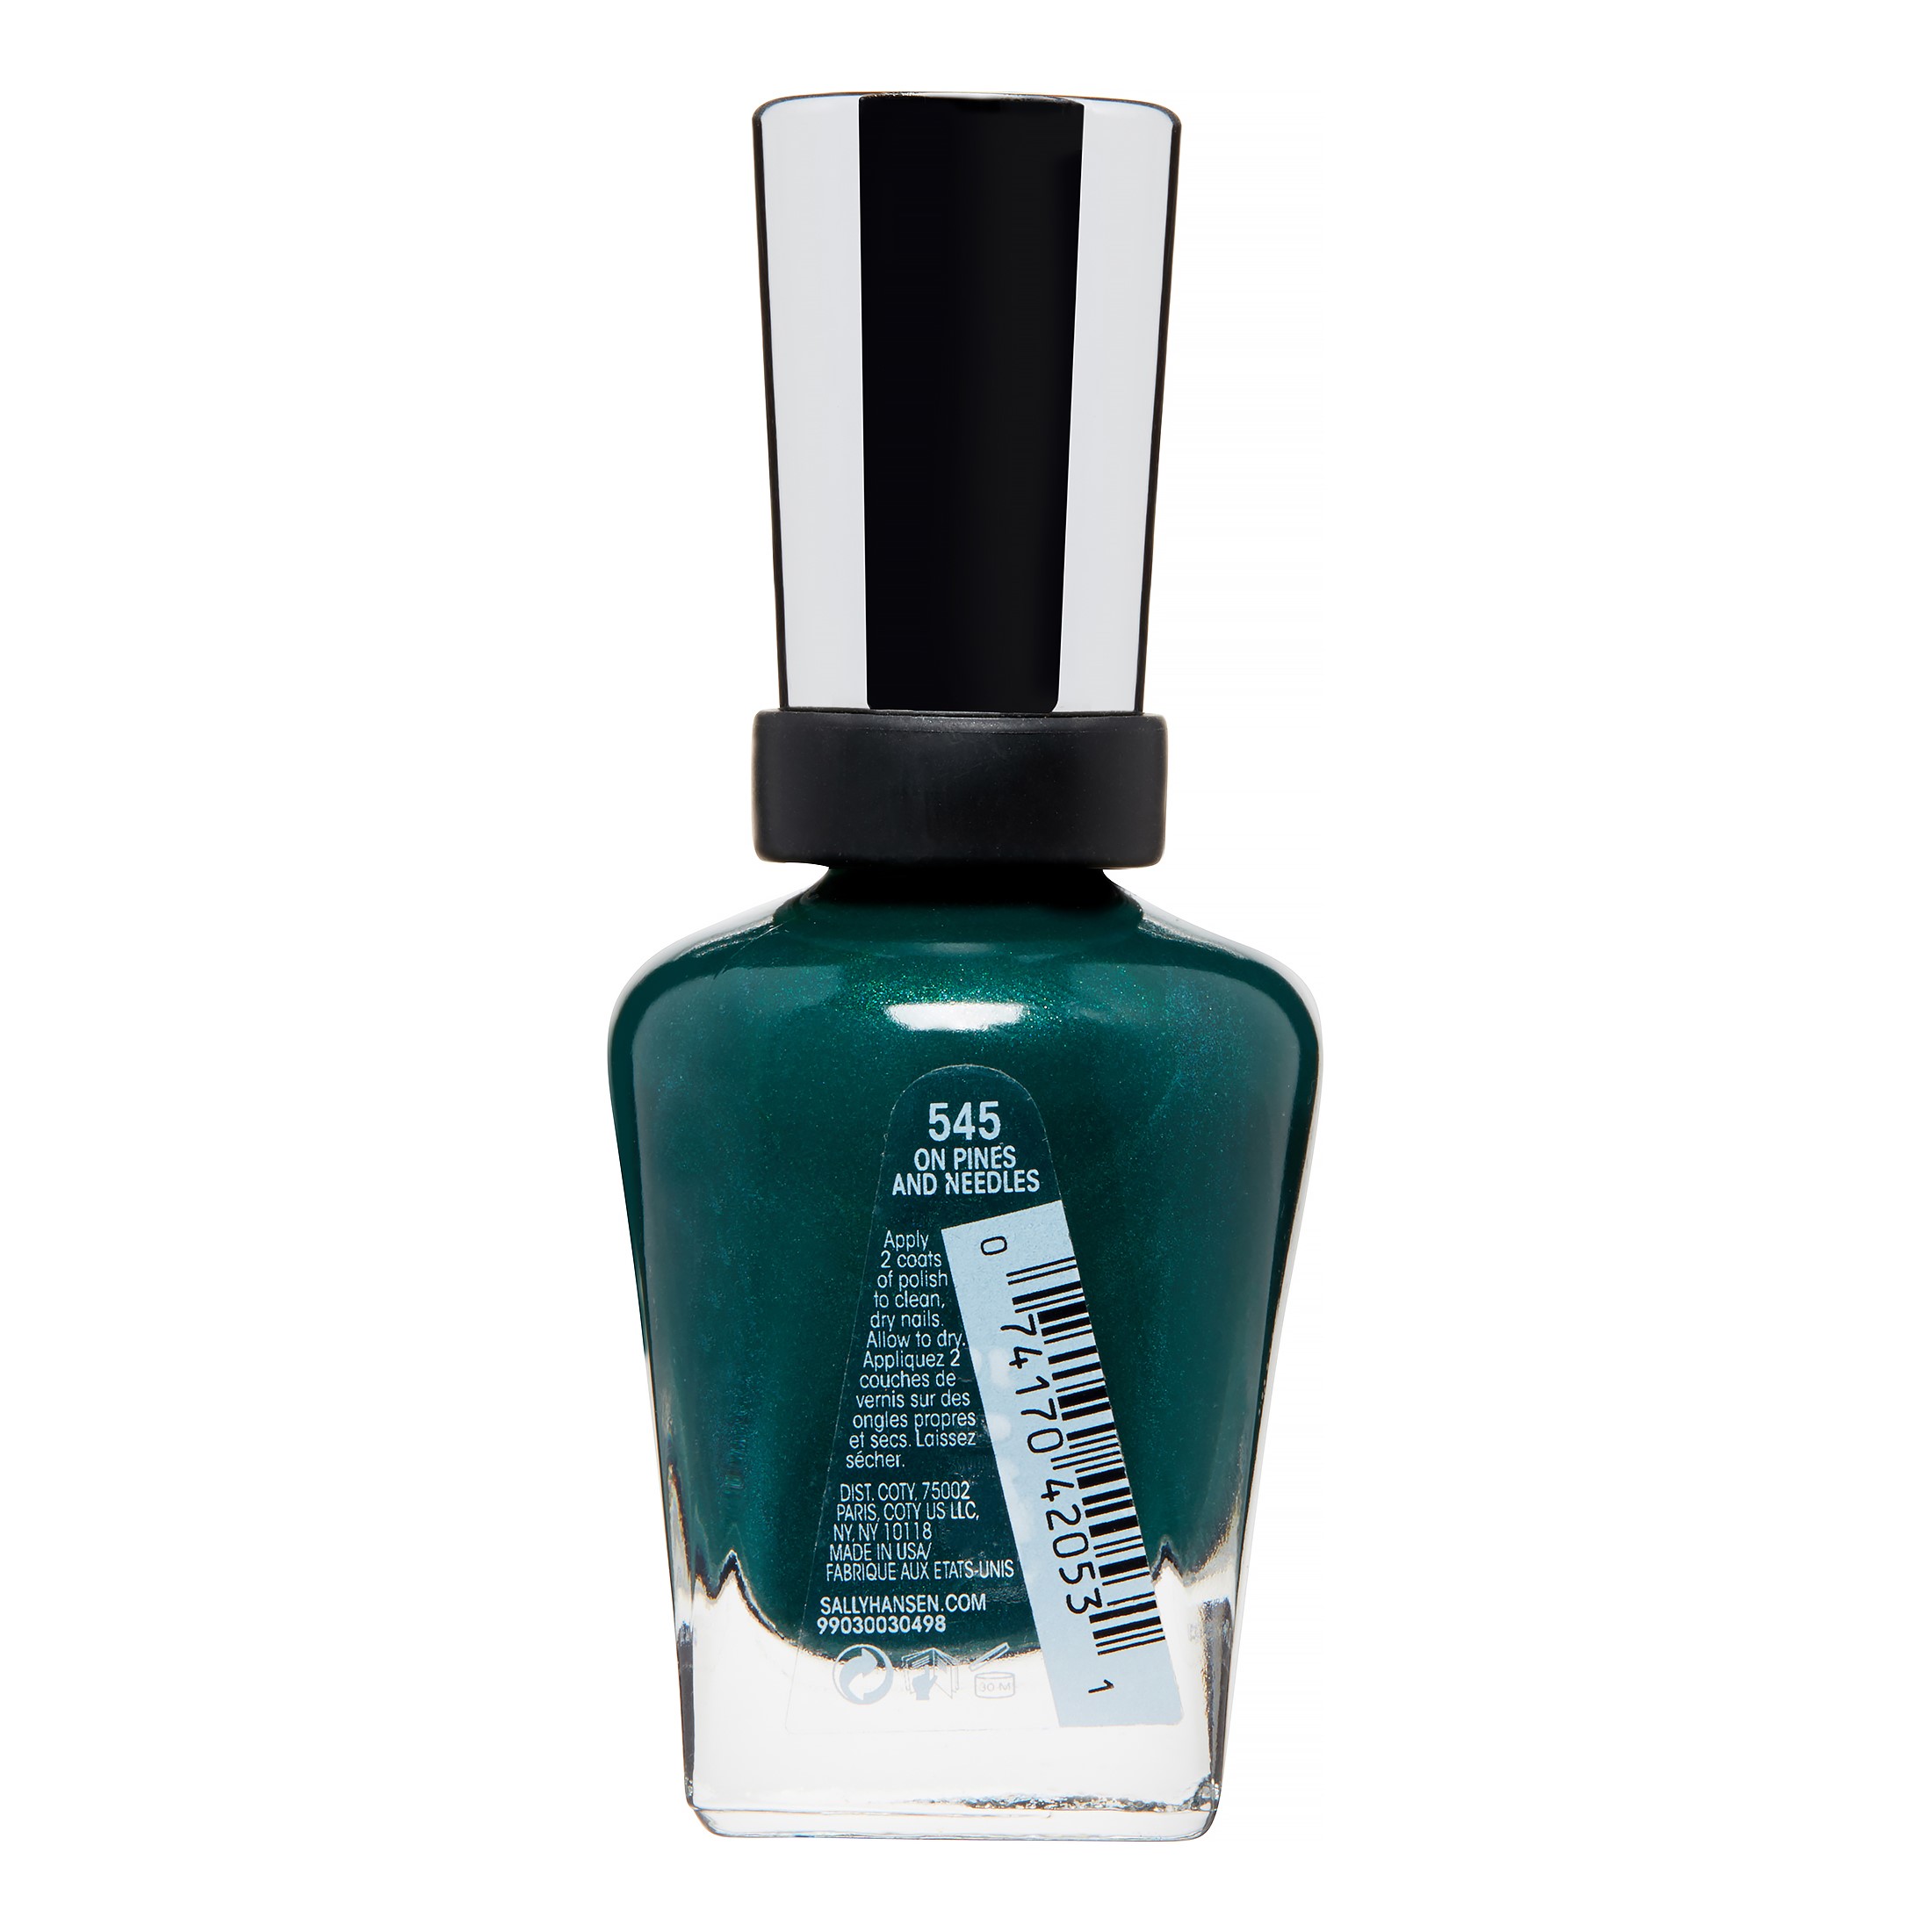 Sally Hansen Complete Salon Manicure Nail Polish, On Pine and Needles - image 3 of 3